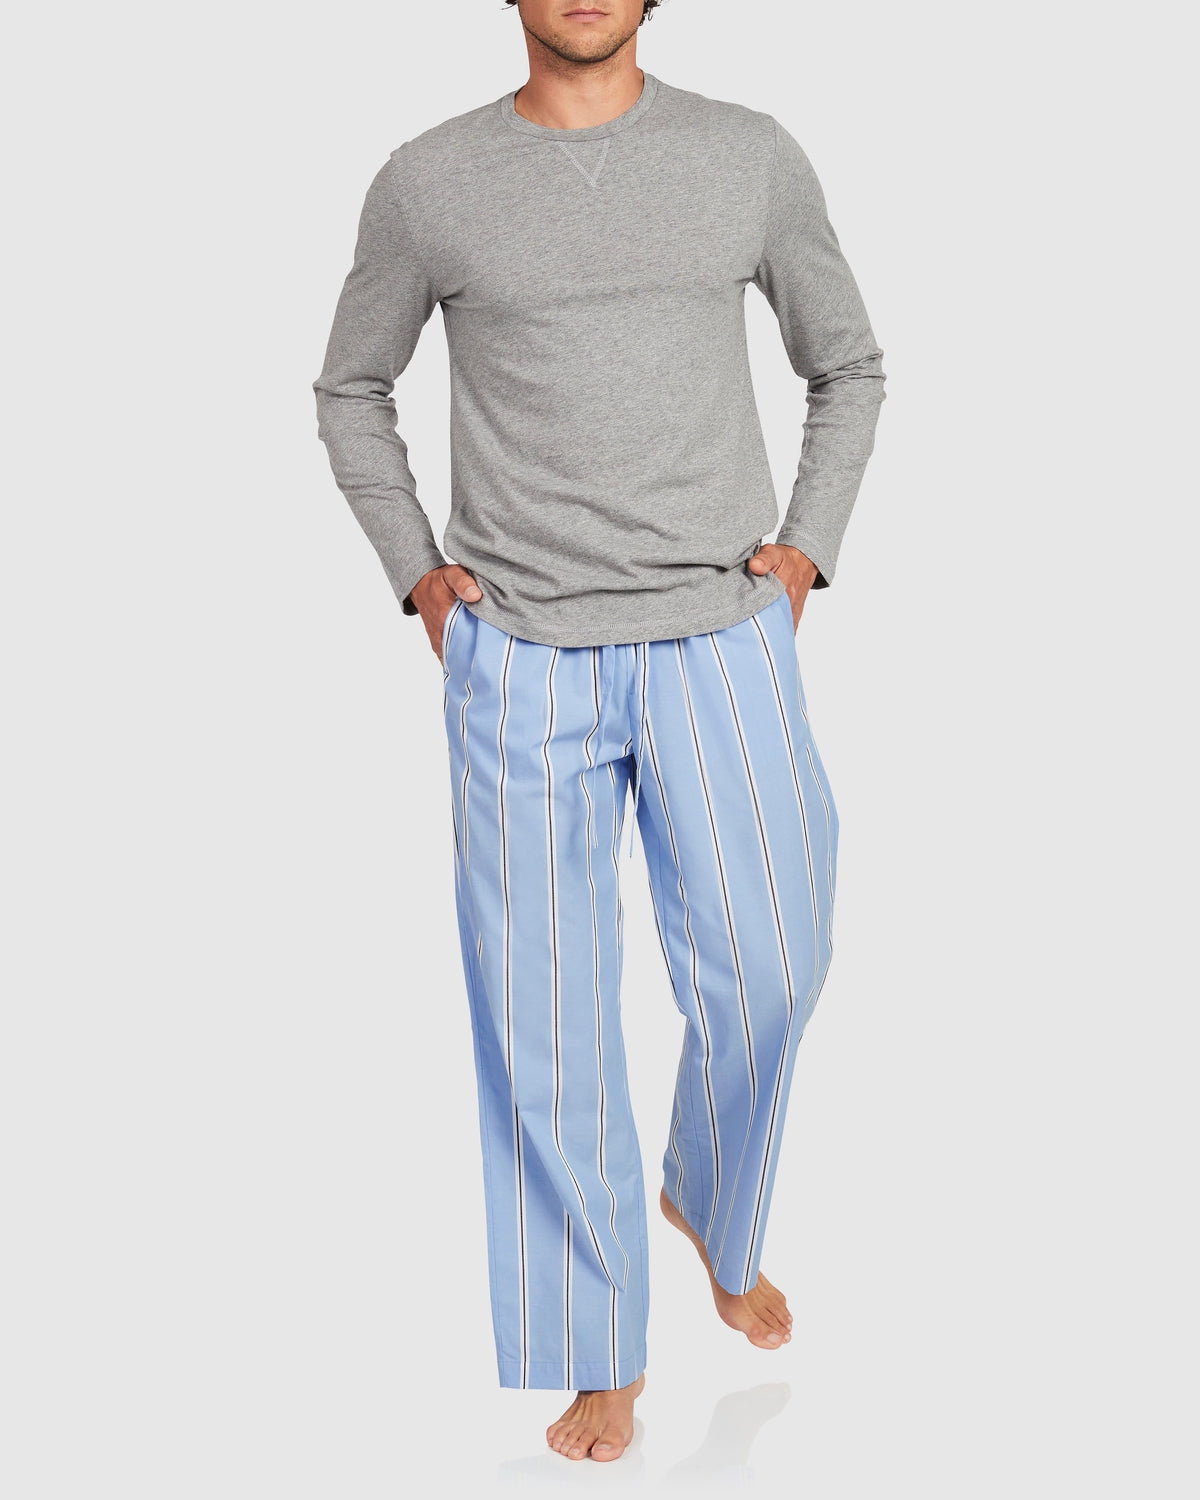 Load image into Gallery viewer, Unisex Cotton Man Pant - Wide Blue Black Stripe
